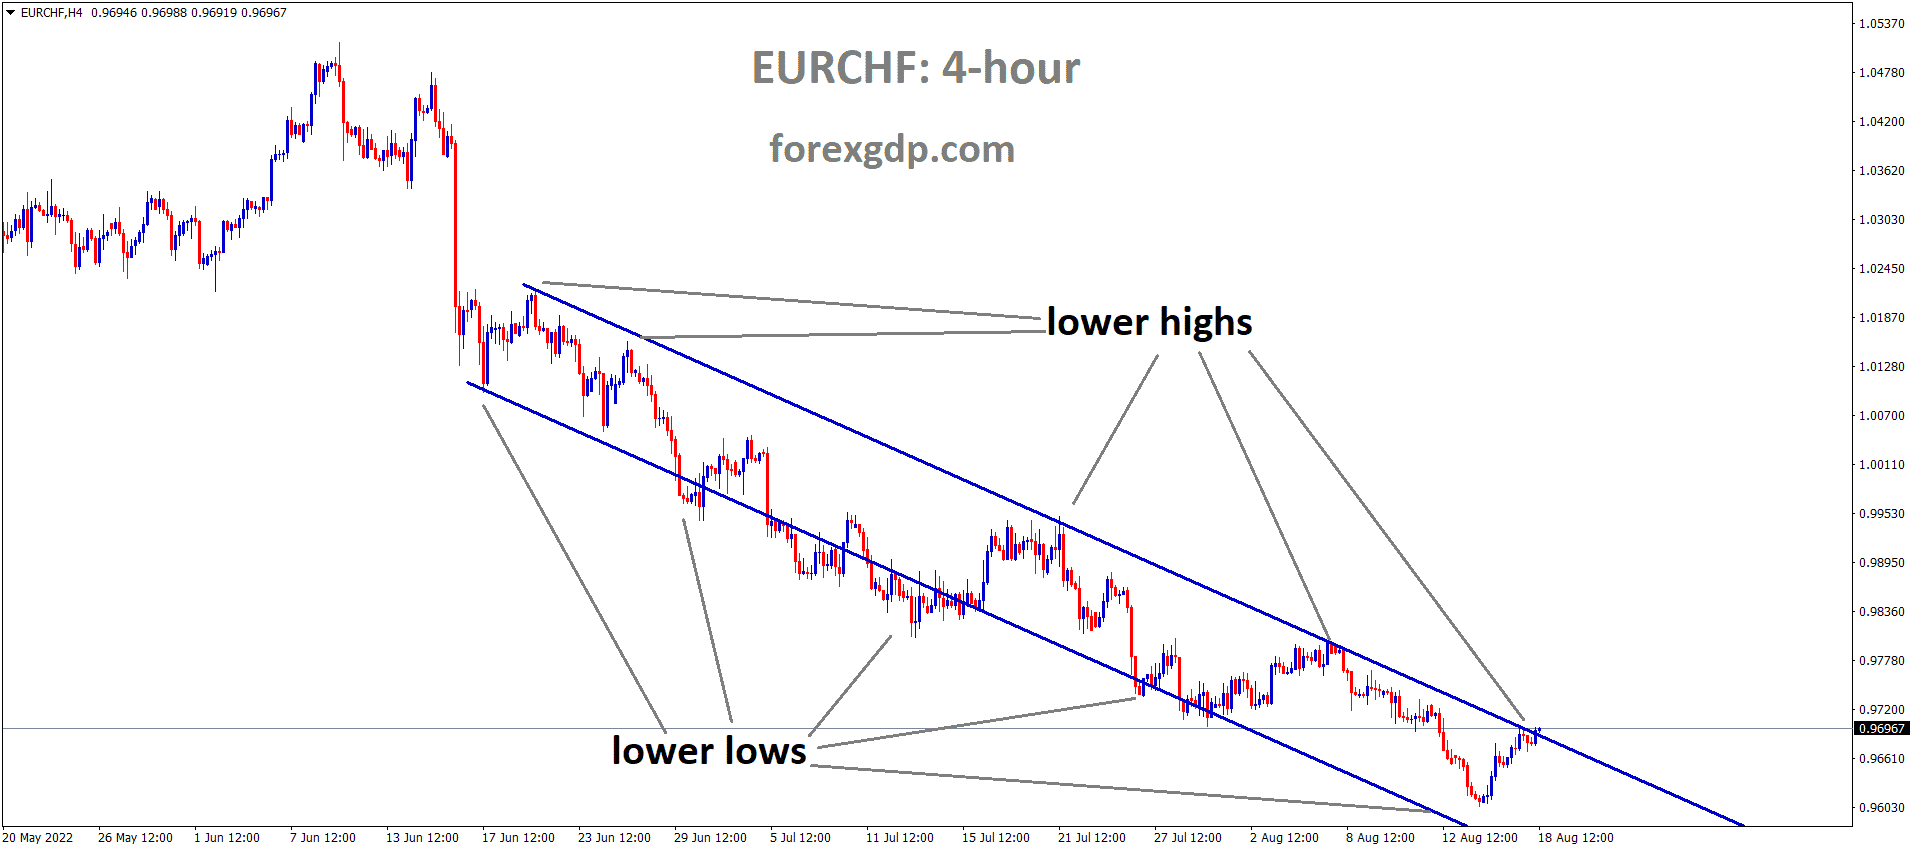 EURCHF is moving in the Descending channel and the Market has reached the Lower high area of the channel